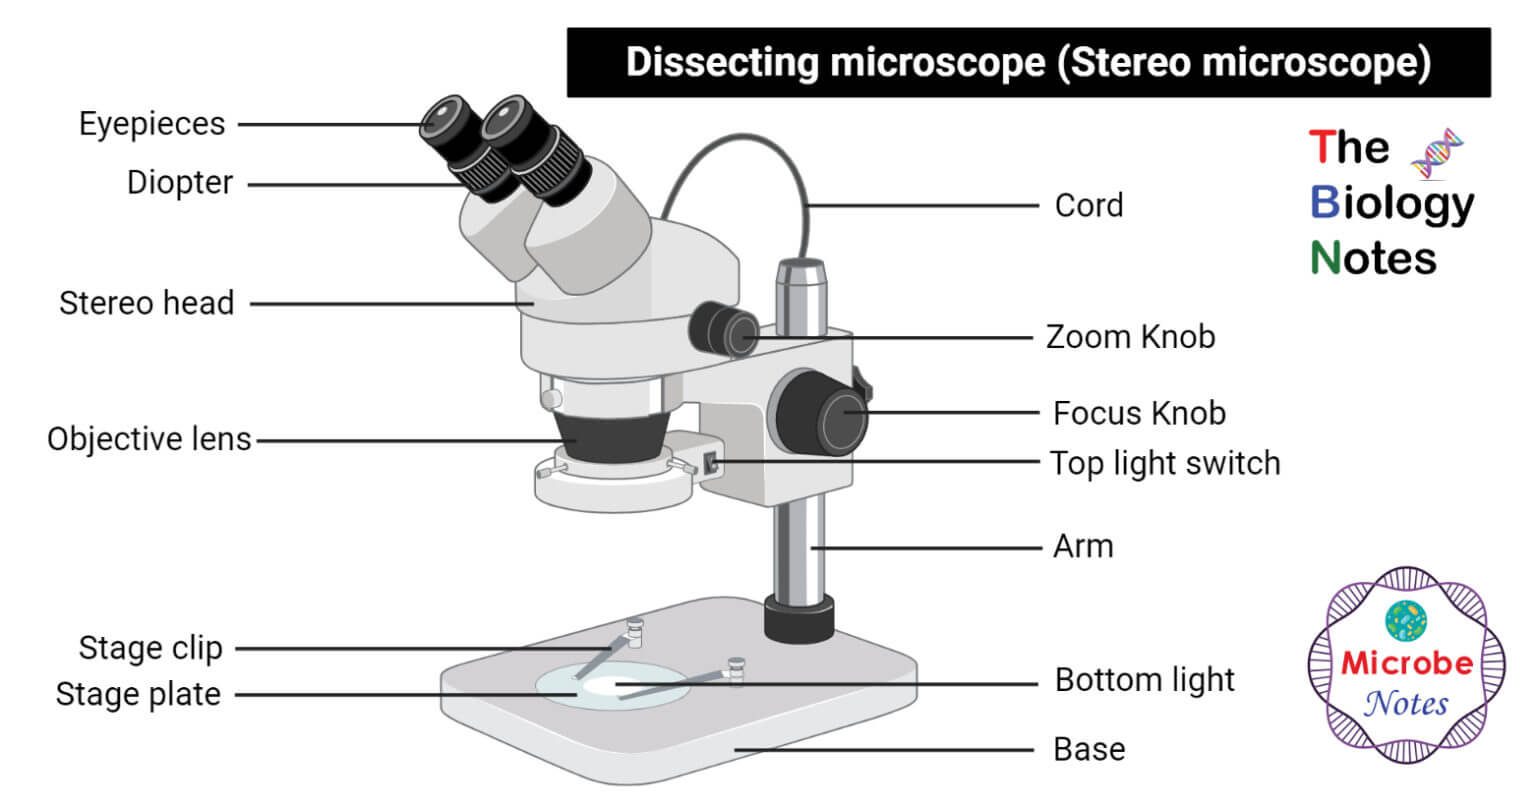 Dissecting Microscope (Stereo Microscope)